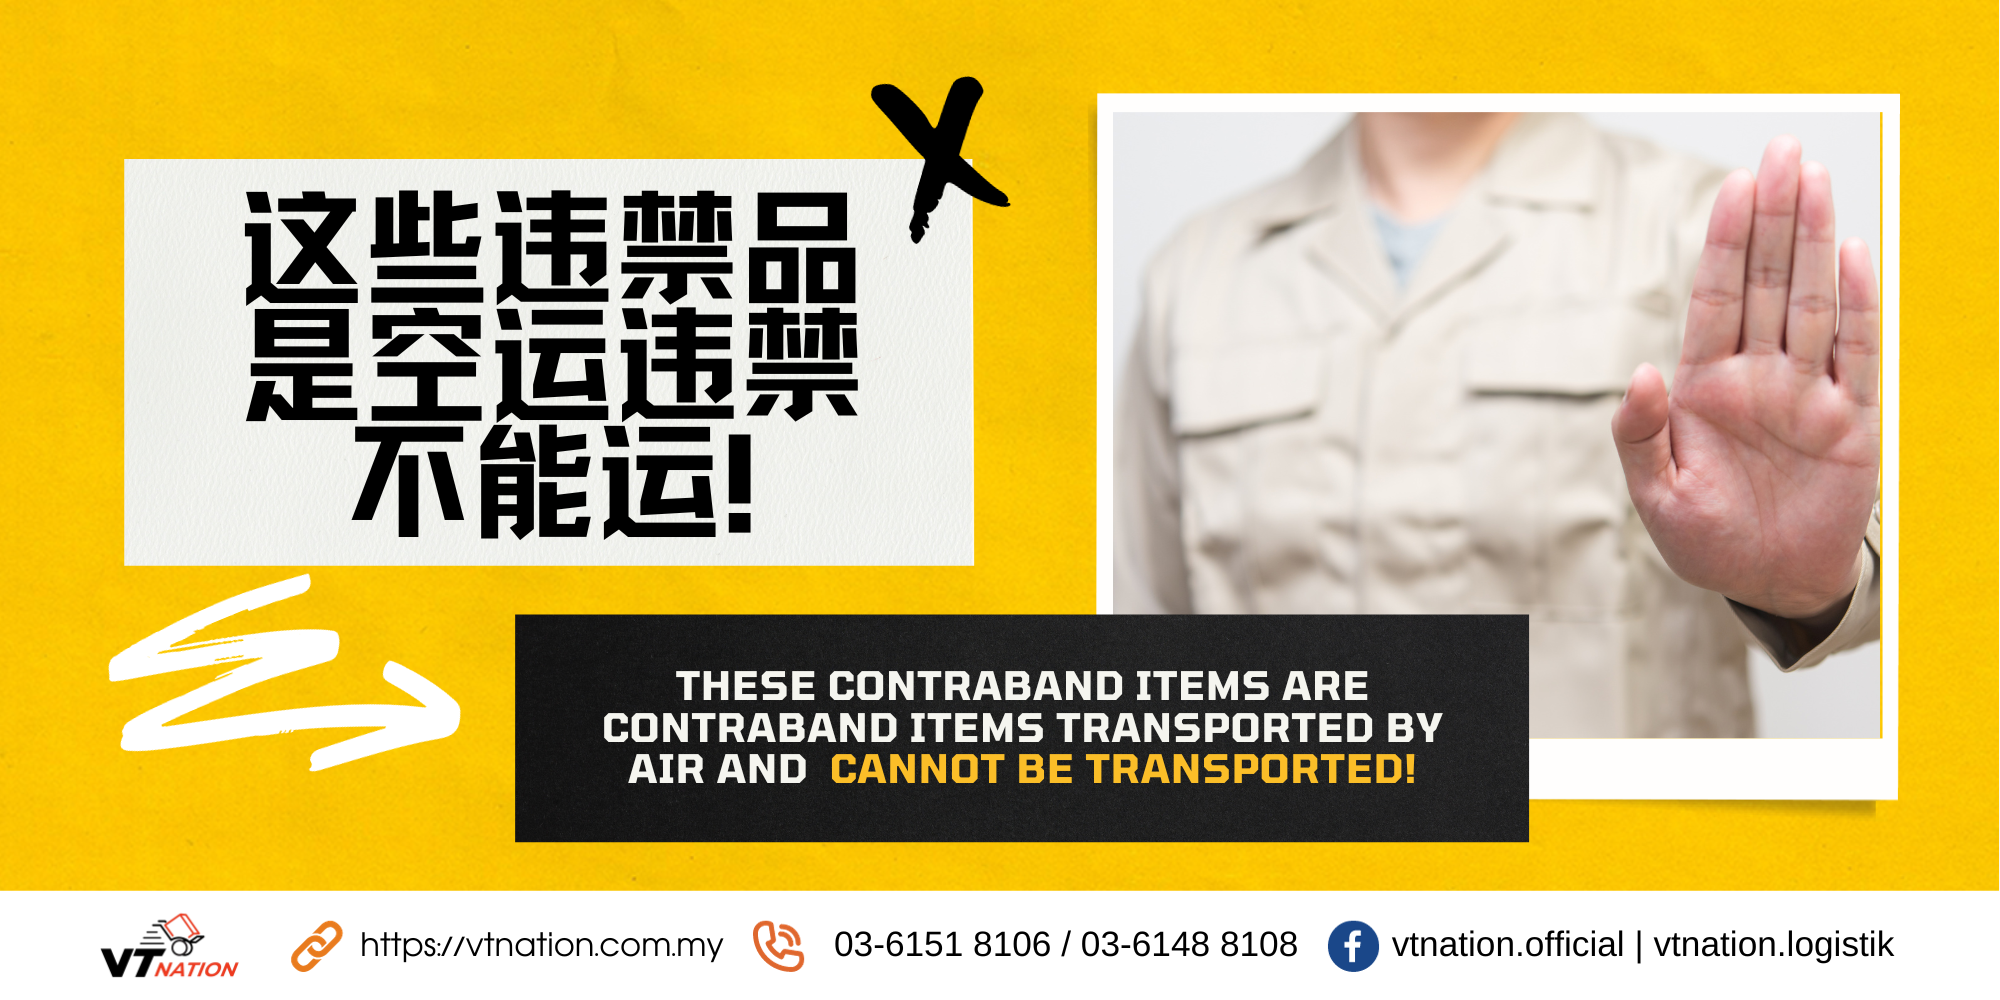 These contraband items are contraband items transported by air and cannot be transported!